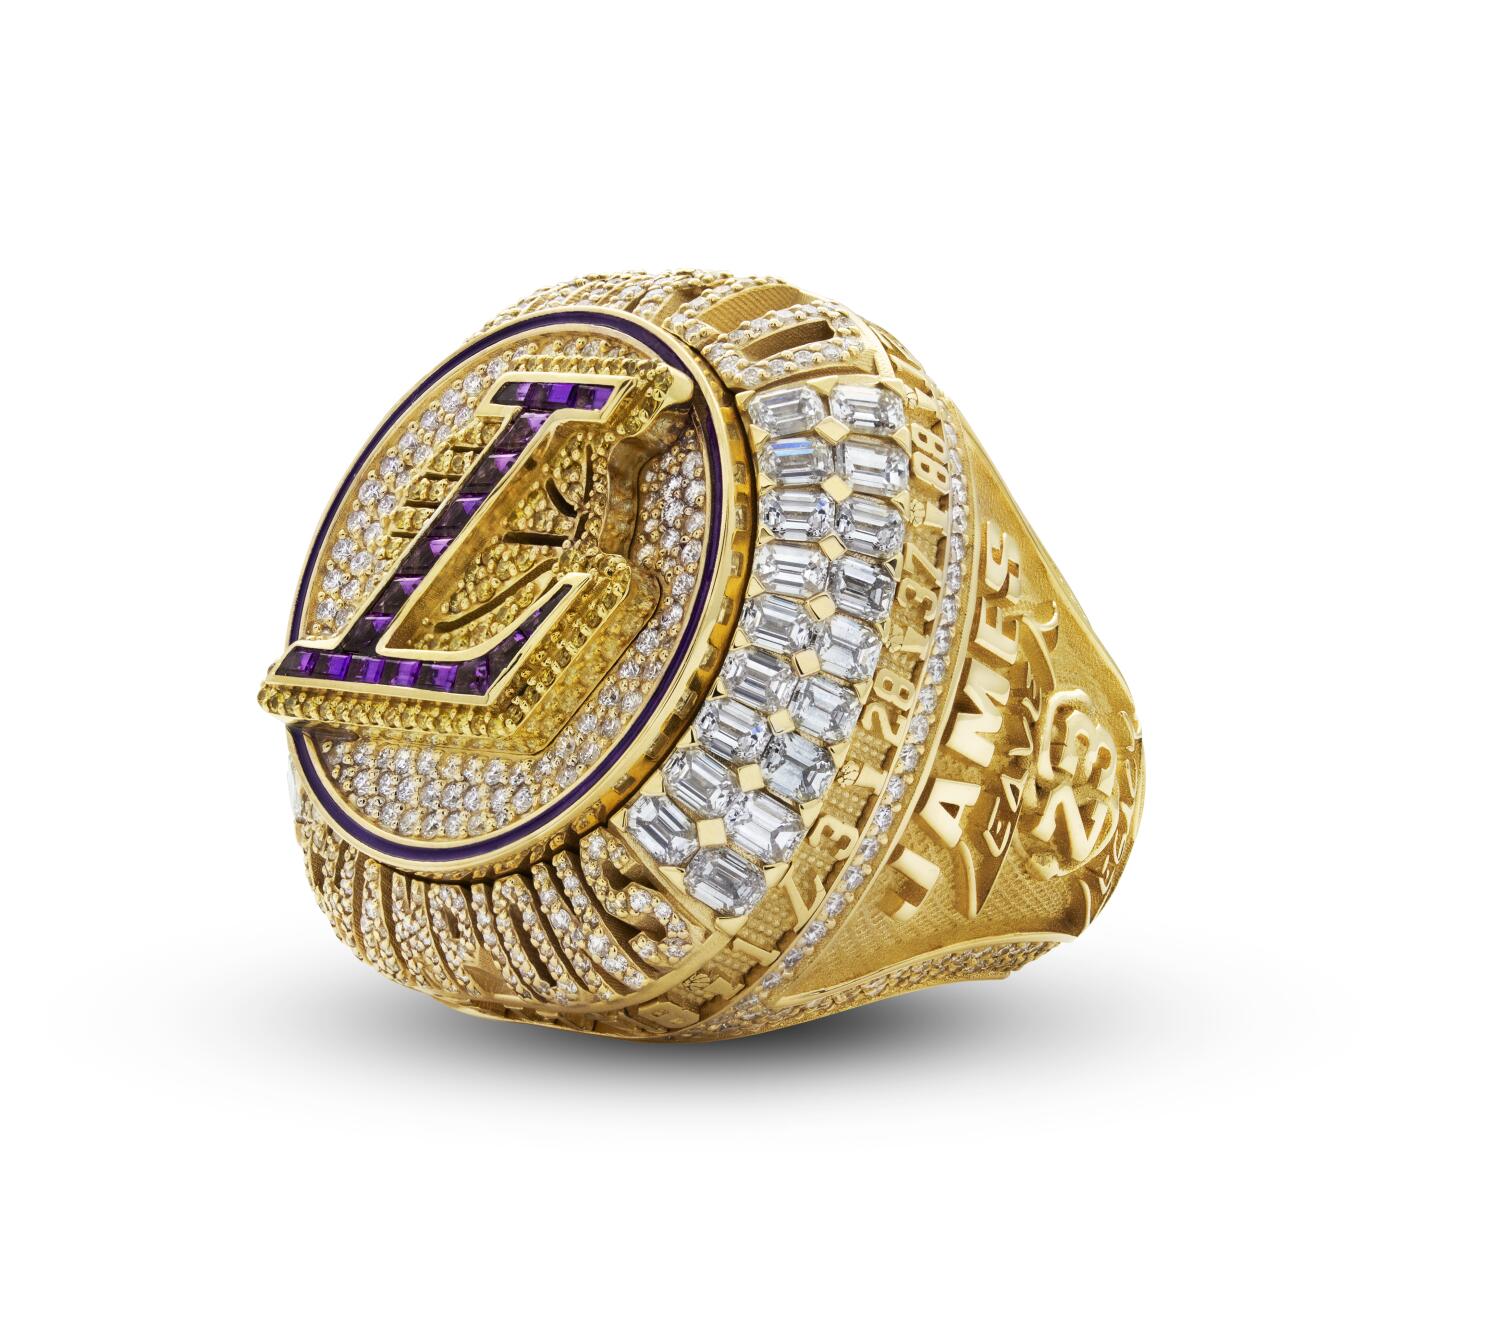 Lakers championship rings have hidden surprises beneath bling - Los Angeles  Times